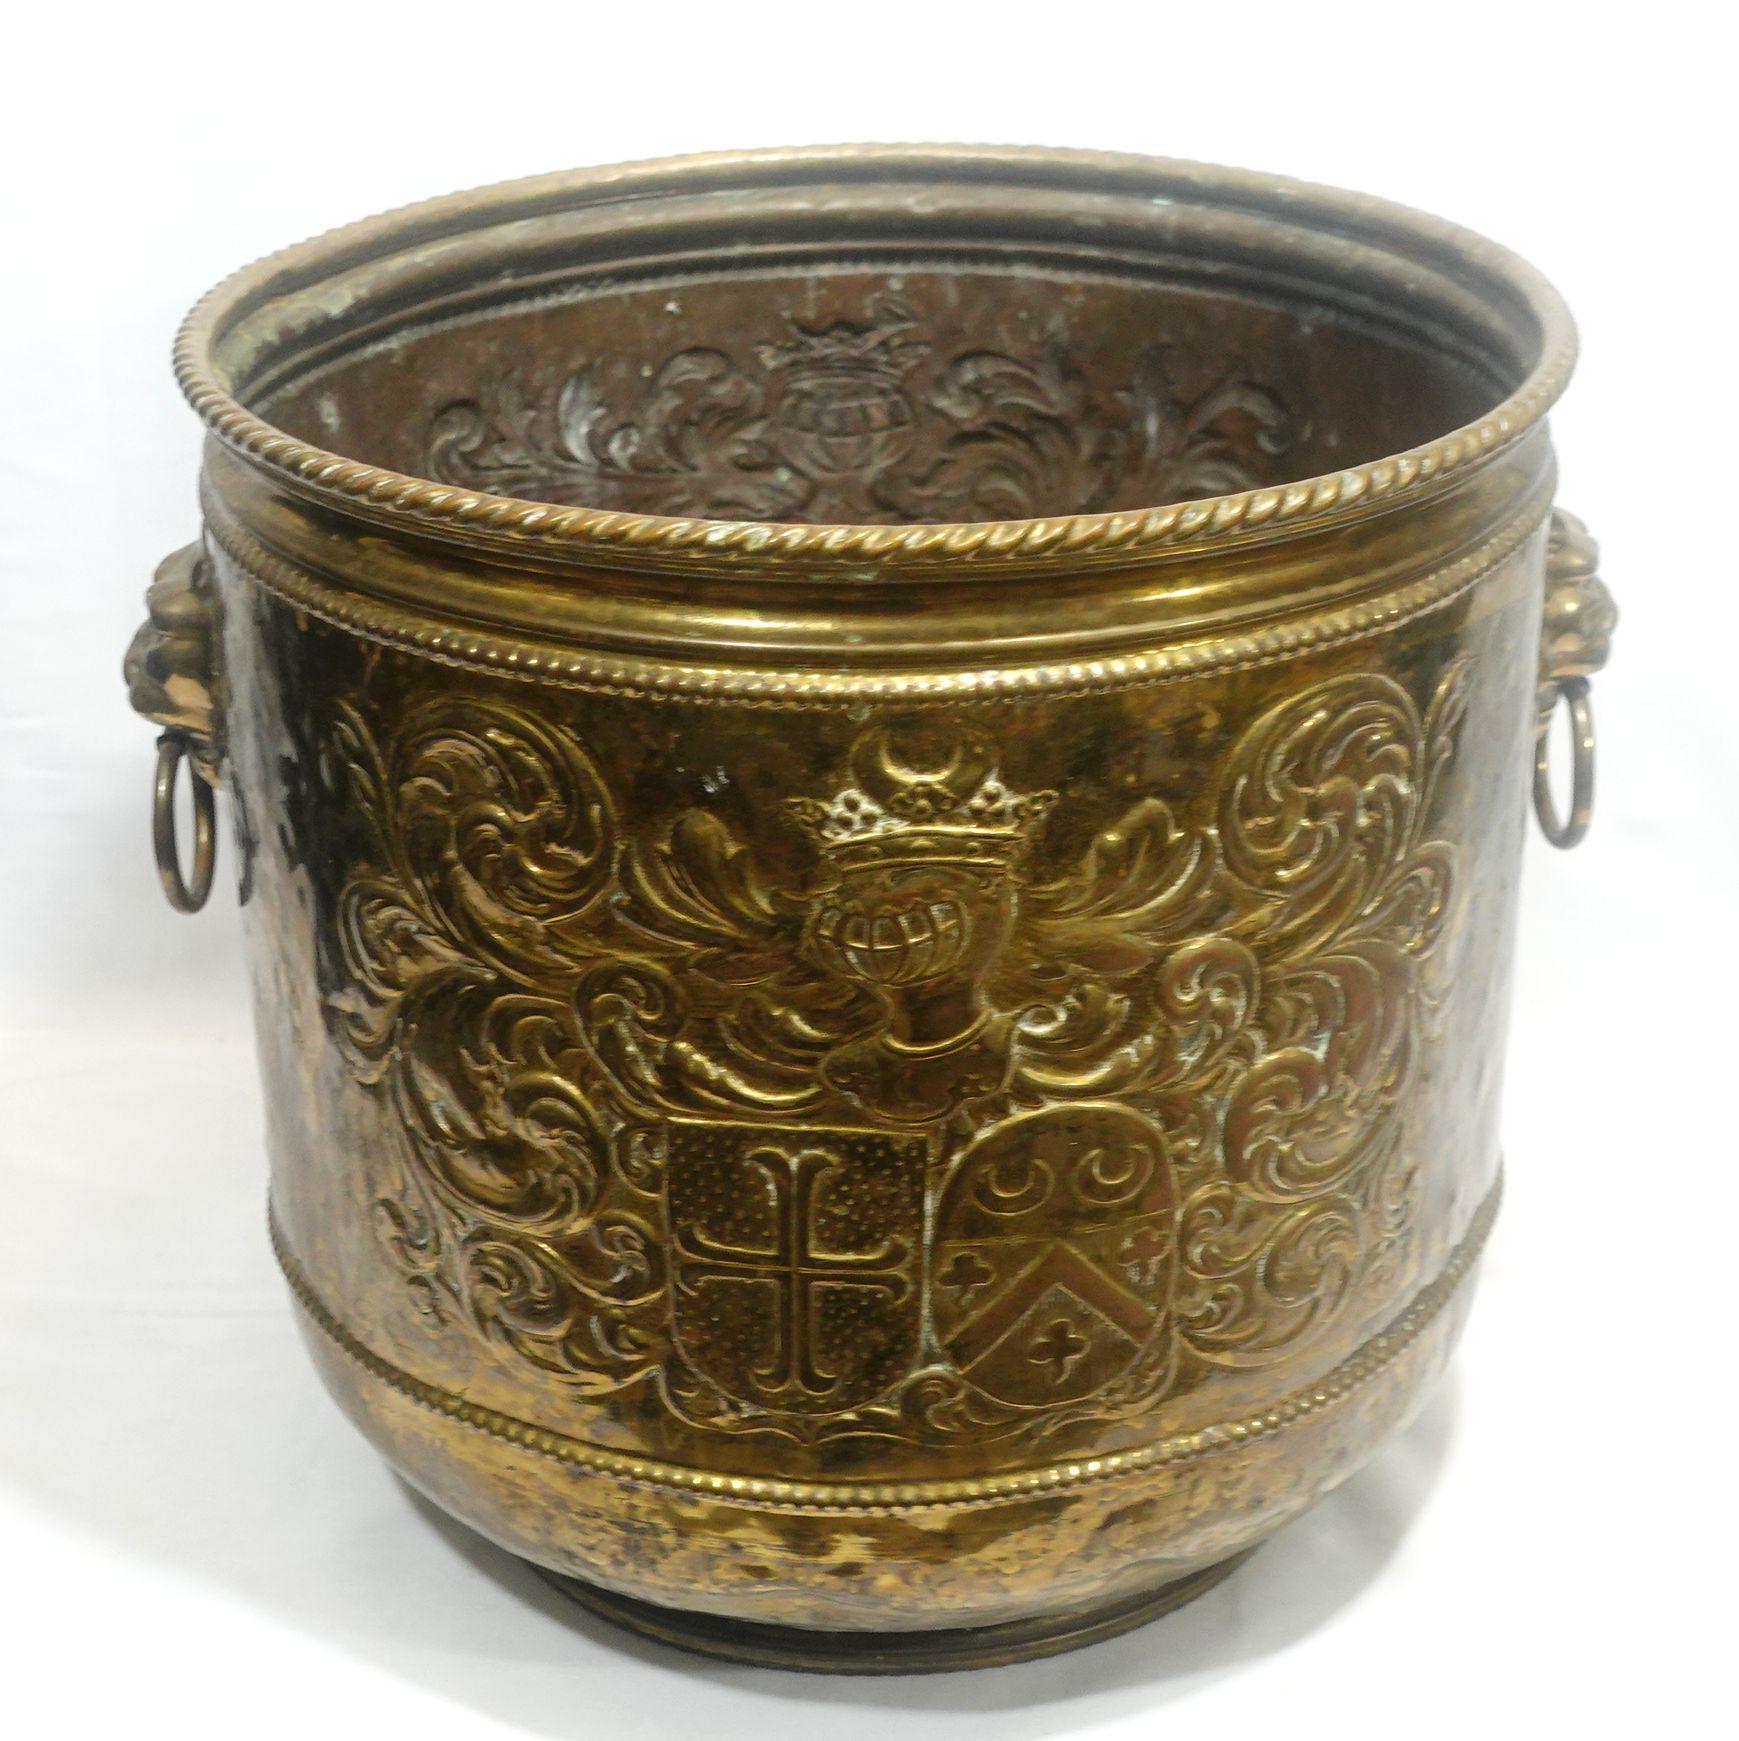 English Antique Large Brass Firewood Bucket w/Repousse Armorial Pattern (14-CB4) 19th C.